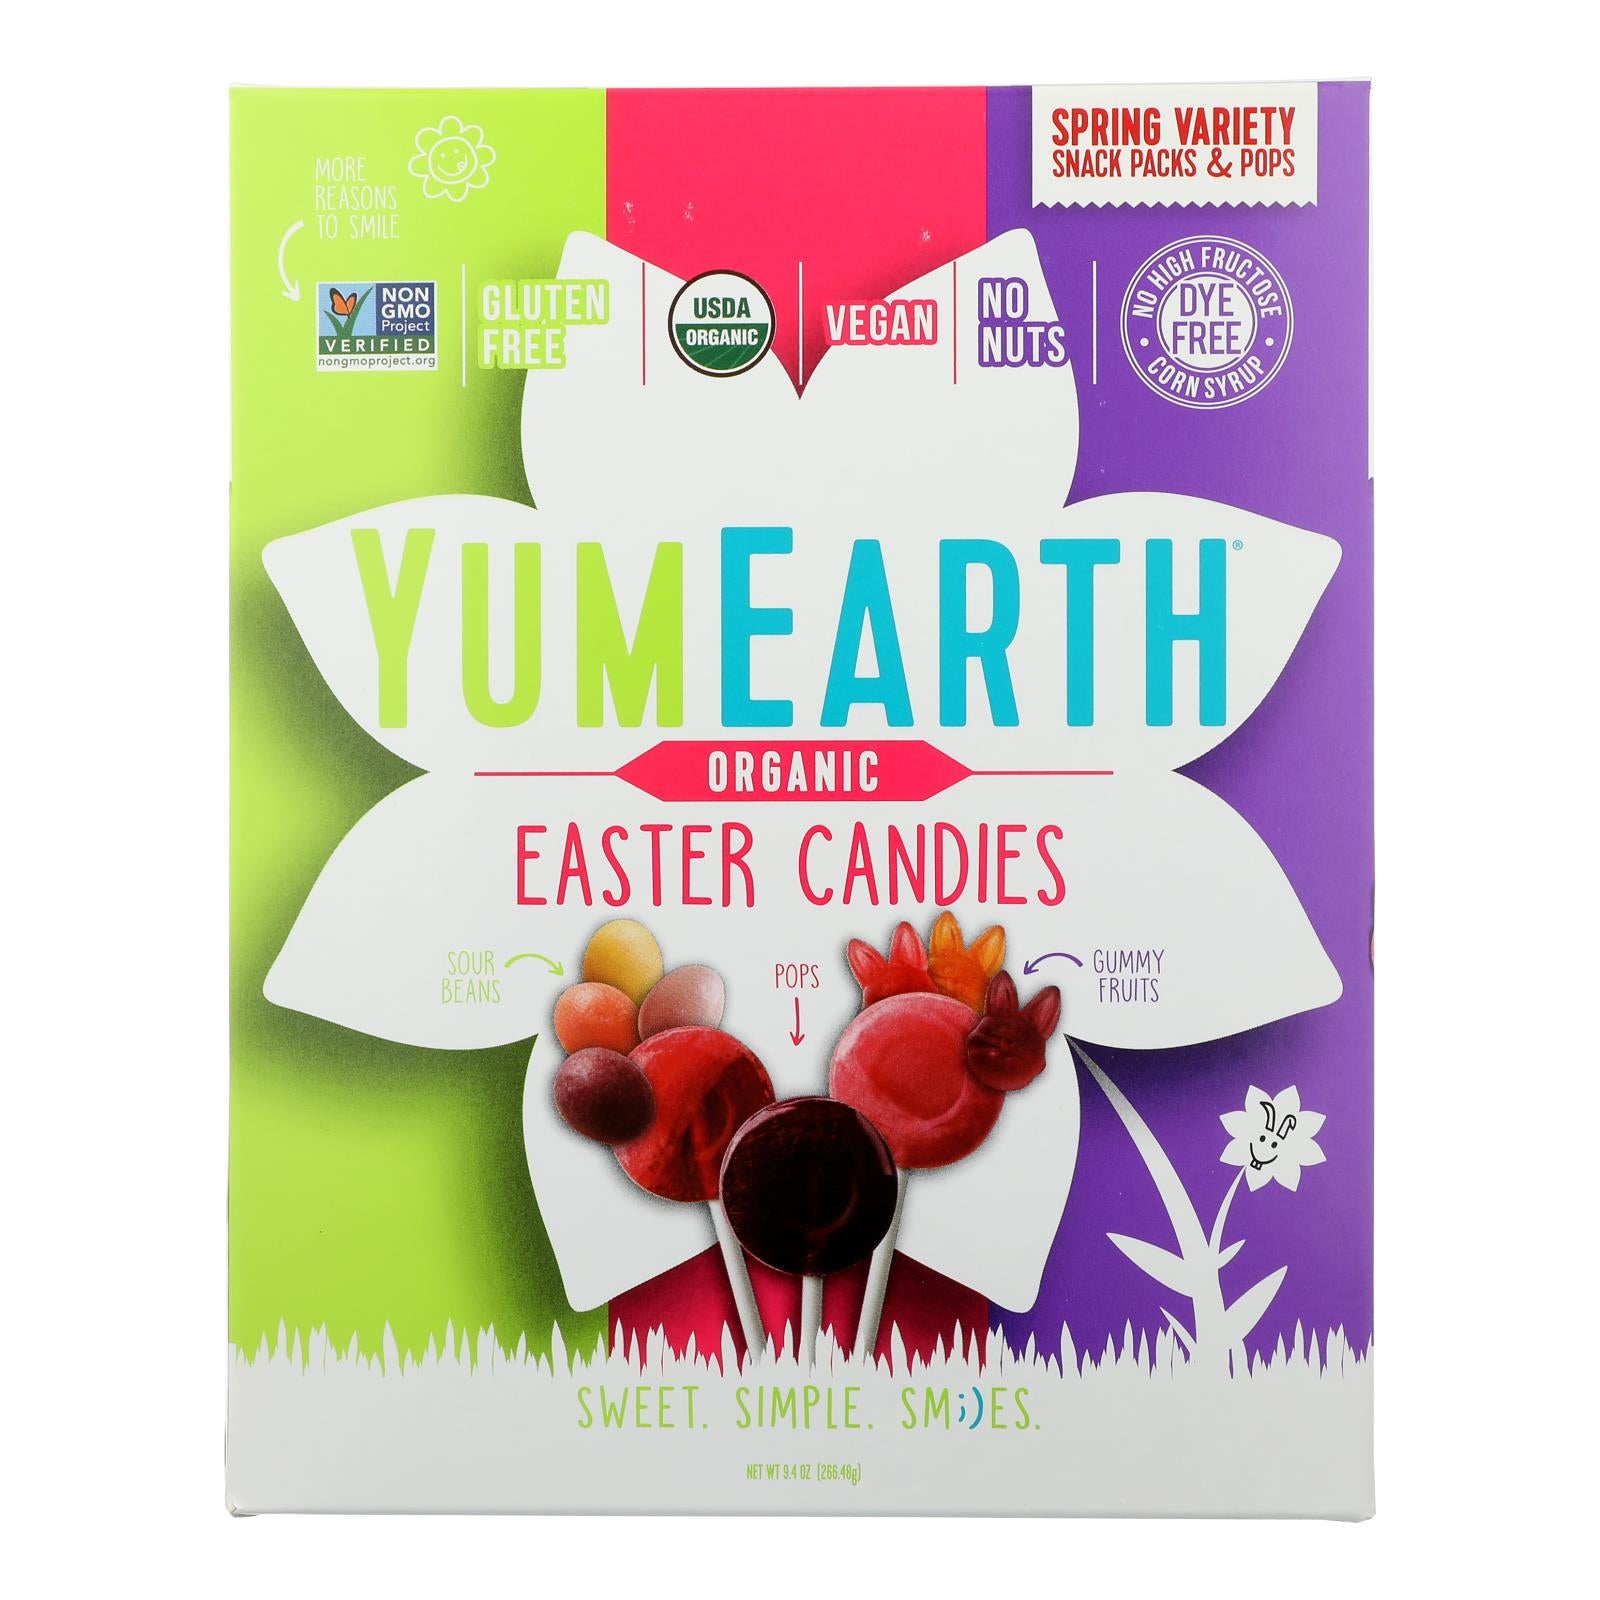 Yumearth - Candy Variety Easter - Case of 6 - 9.40 OZ